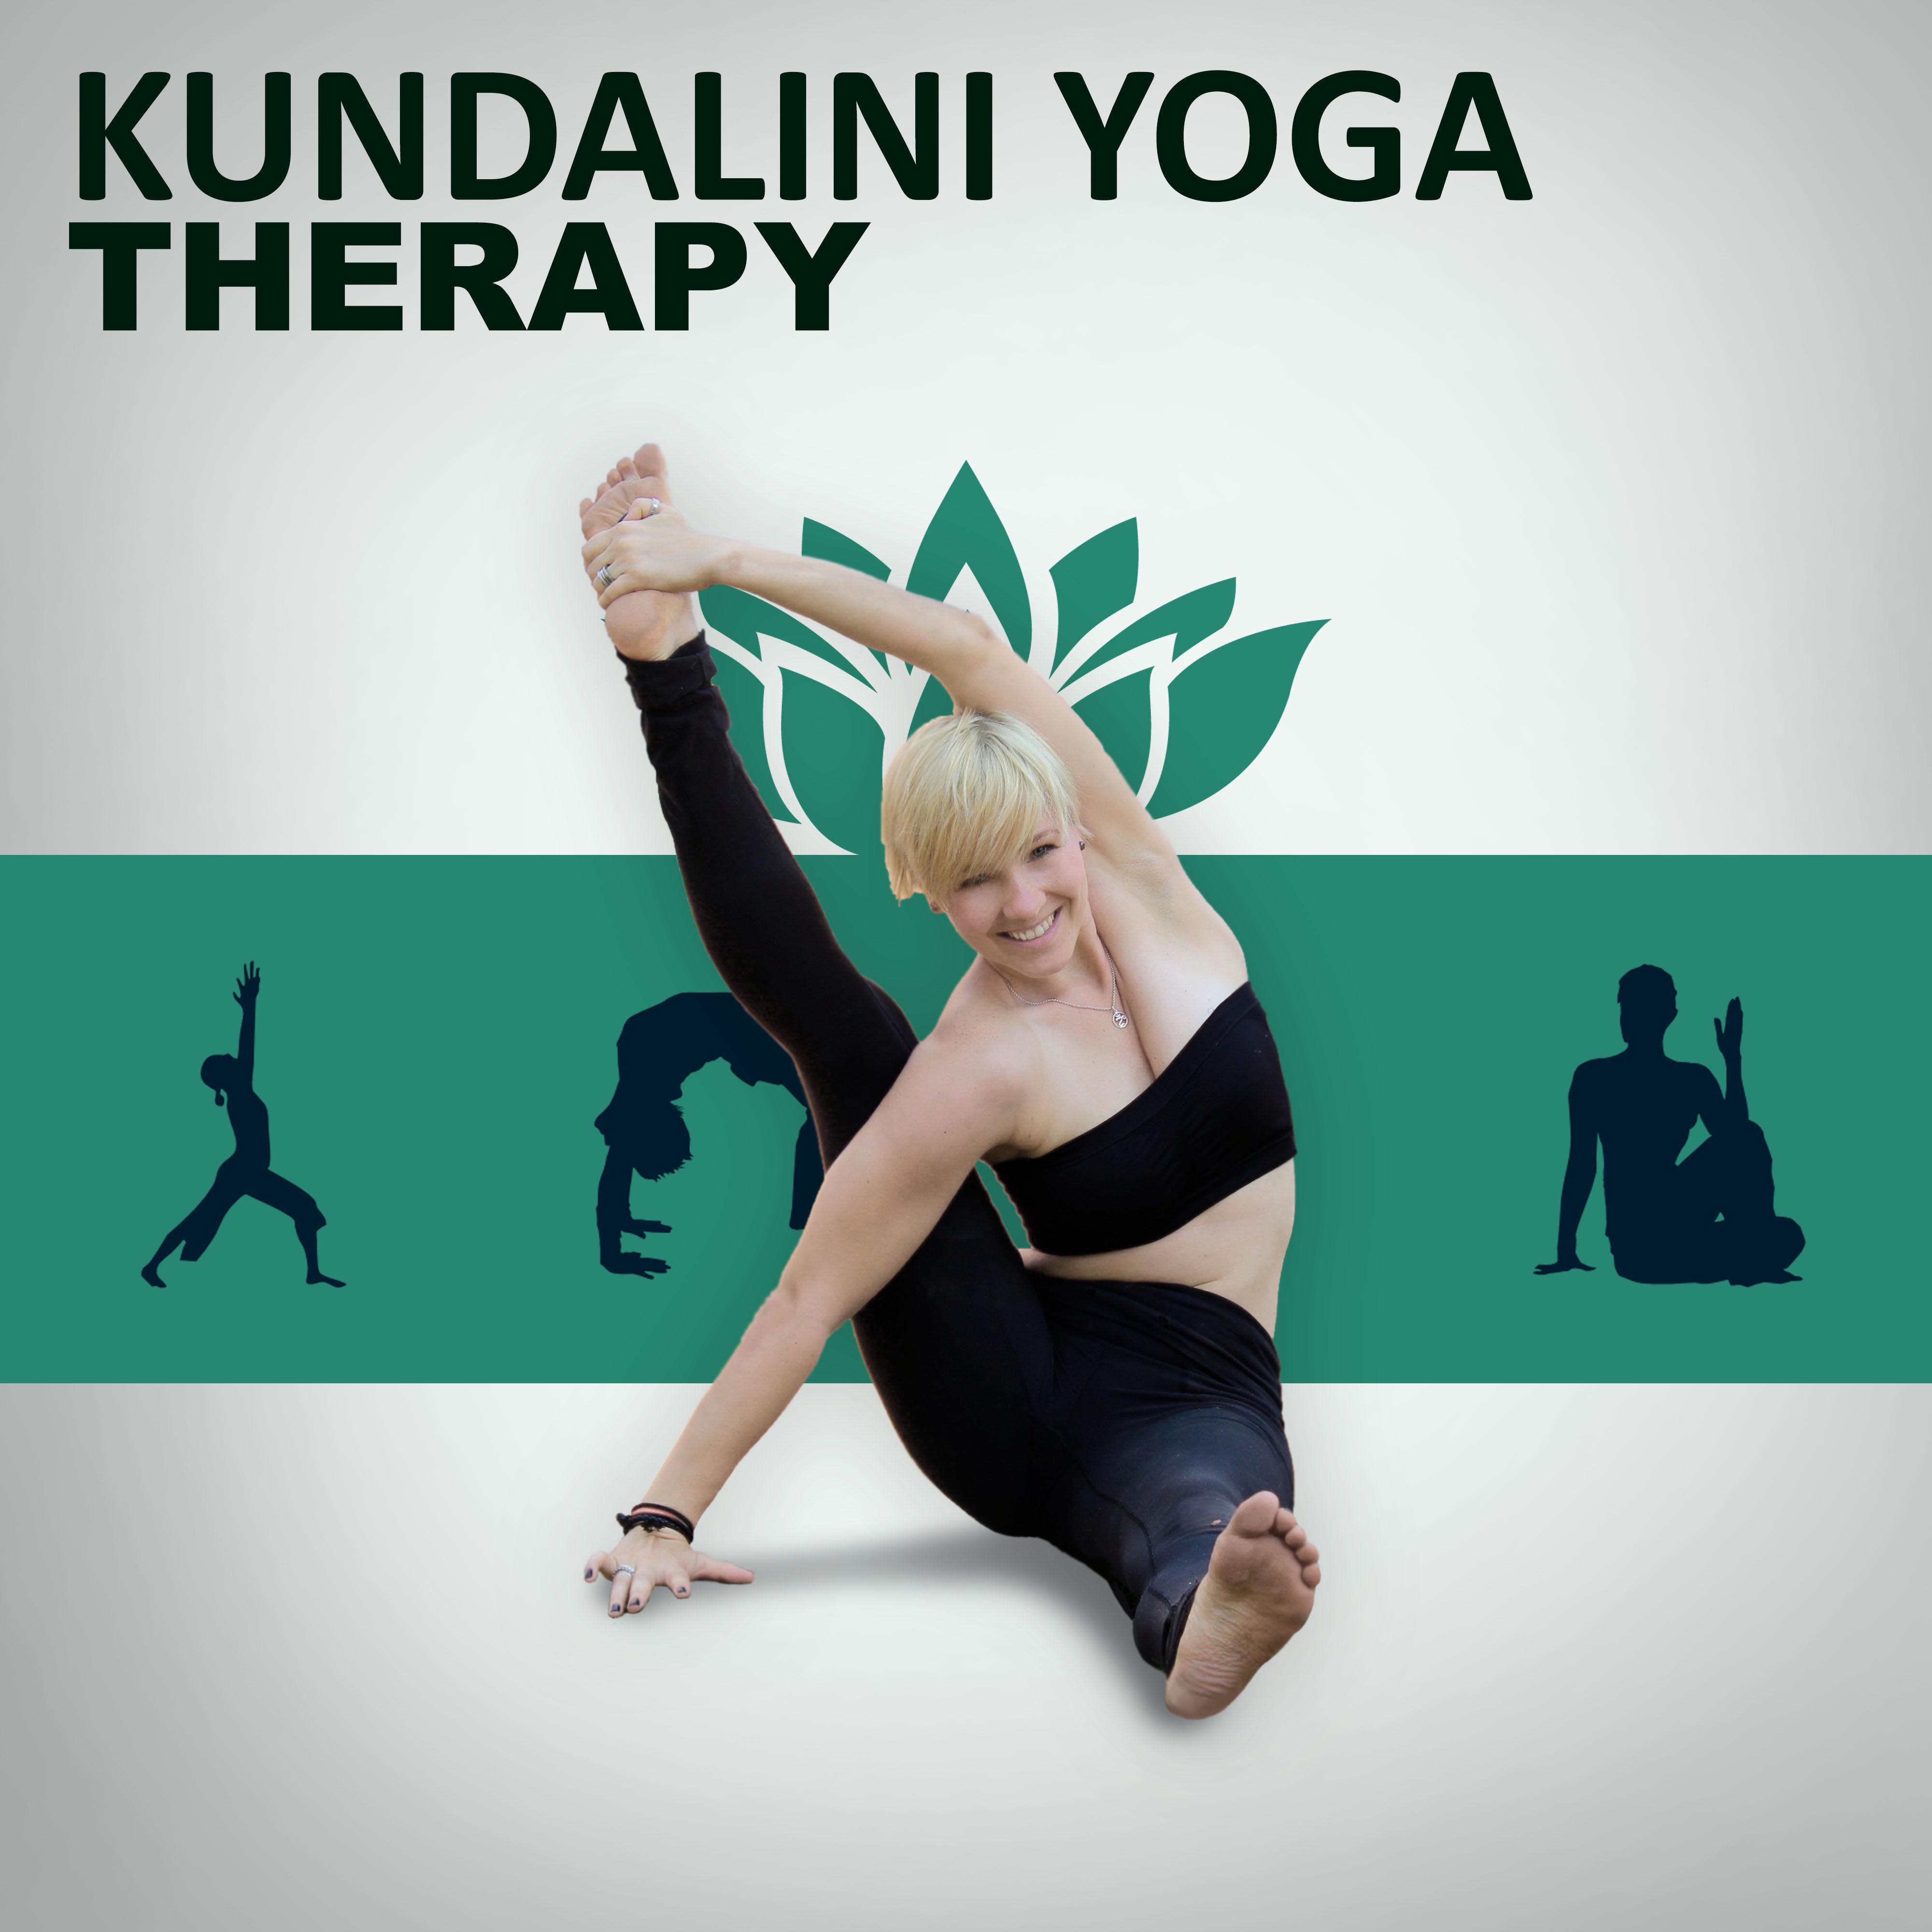 Kundalini Yoga Therapy  The Best Calming Sounds for Meditation, Yoga Zen, Metta, Relax and Be Present, Pure Mind and Enjoy Yourself